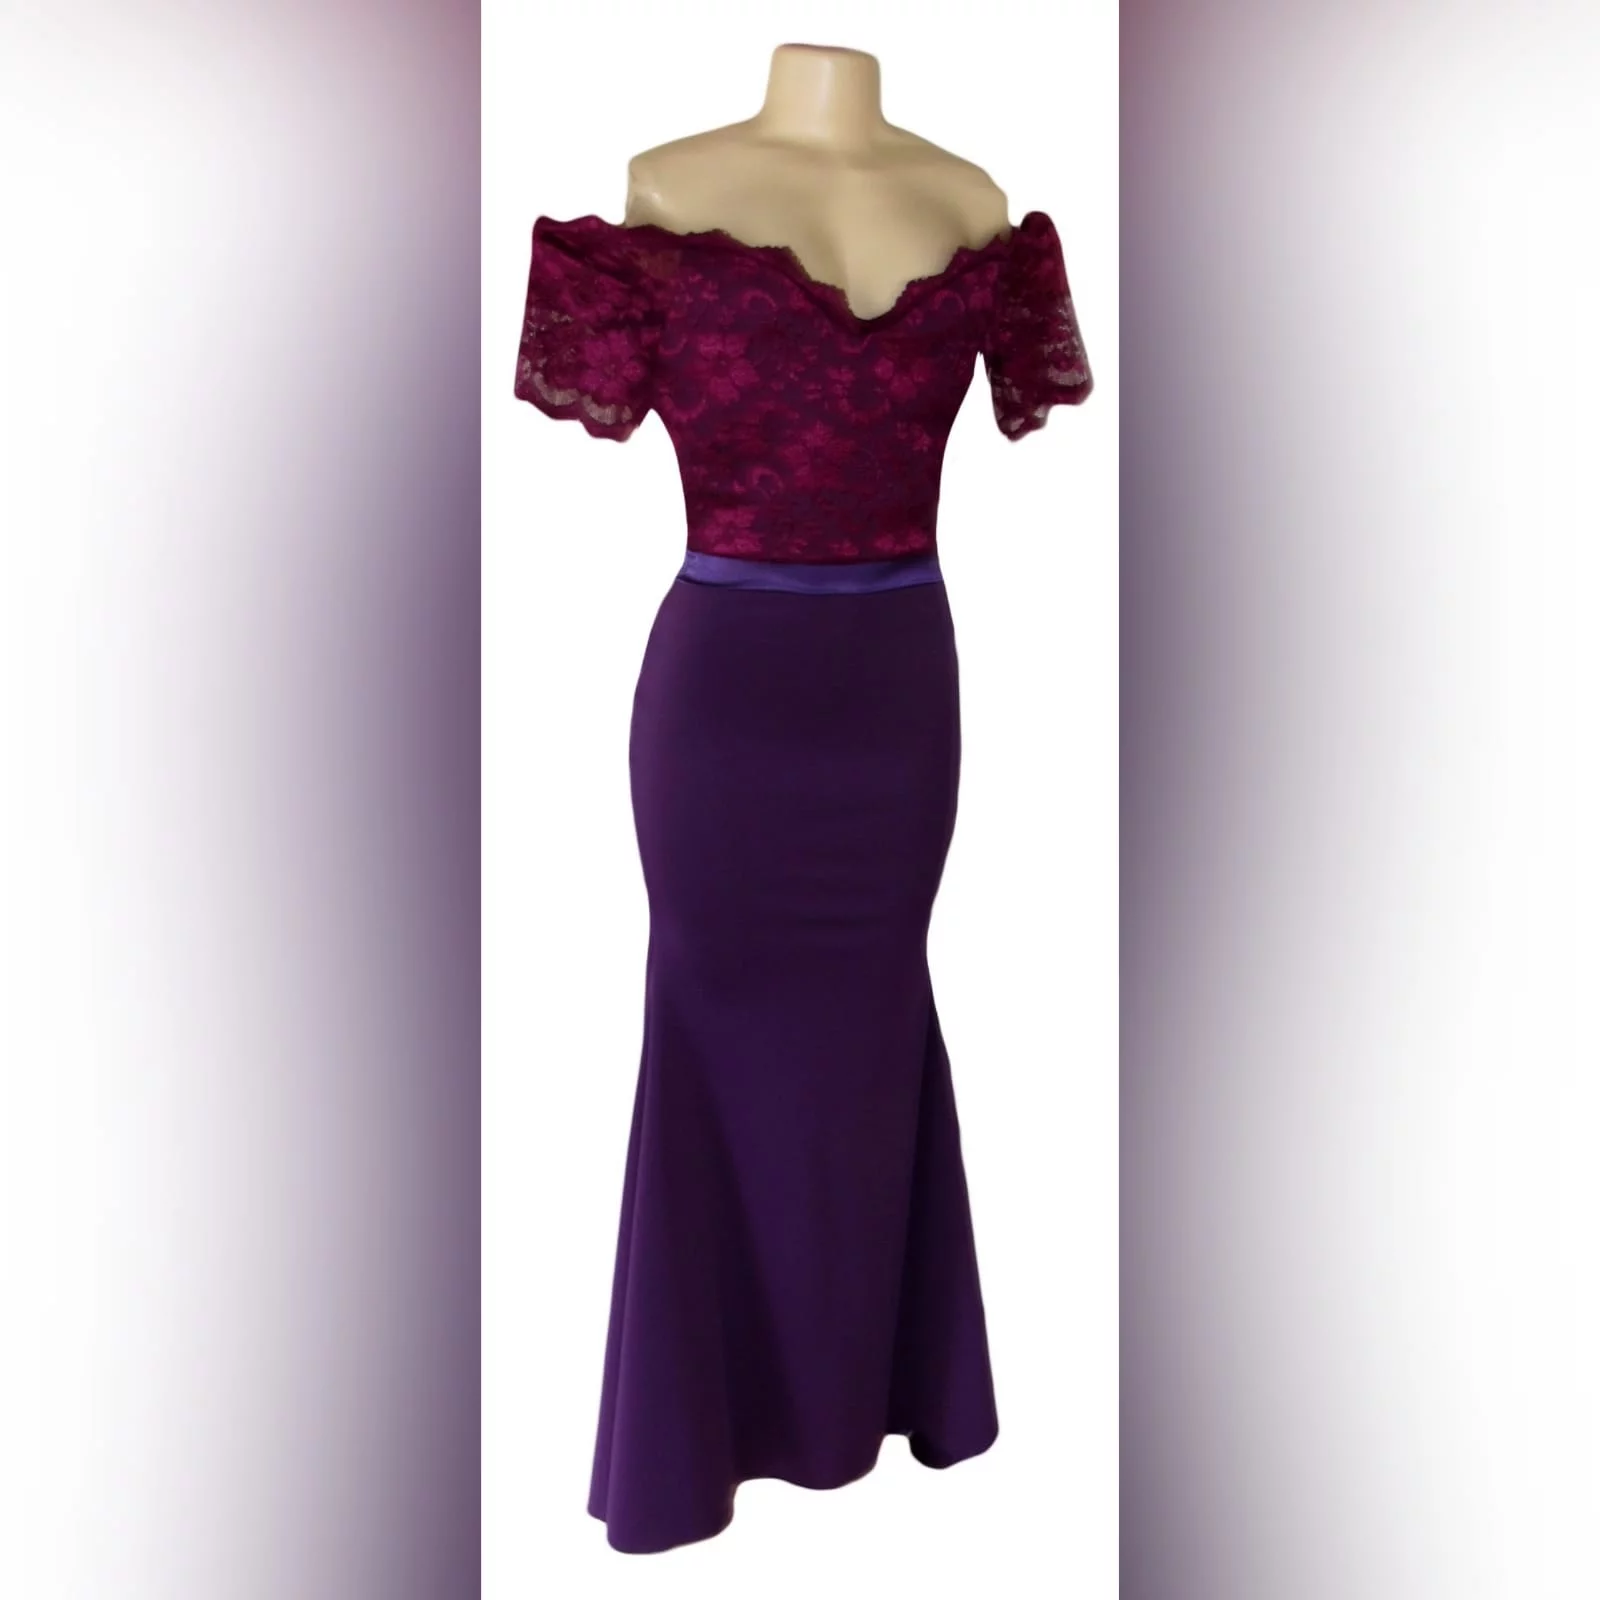 Off shoulder 2 tone purple soft mermaid bridesmaid dress 1 off shoulder 2 tone purple soft mermaid bridesmaid dress with a lace bodice. Detailed with a satin belt and buttons.